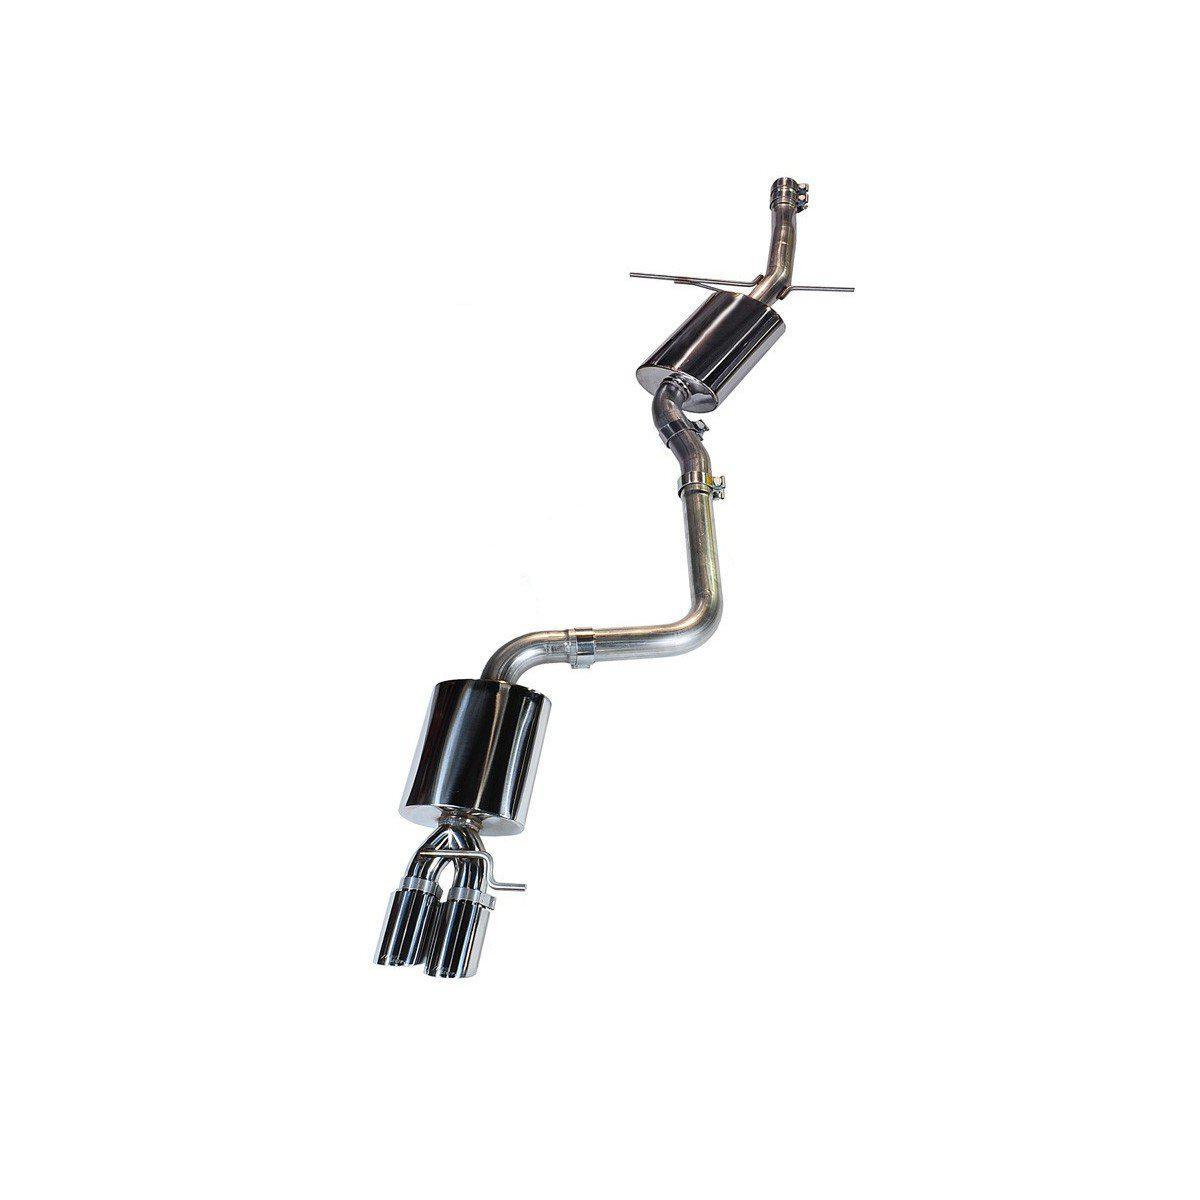 Awe Tuning B8.5 Audi A5 2.0T Touring Edition Cat-Back Exhaust System-A Little Tuning Co